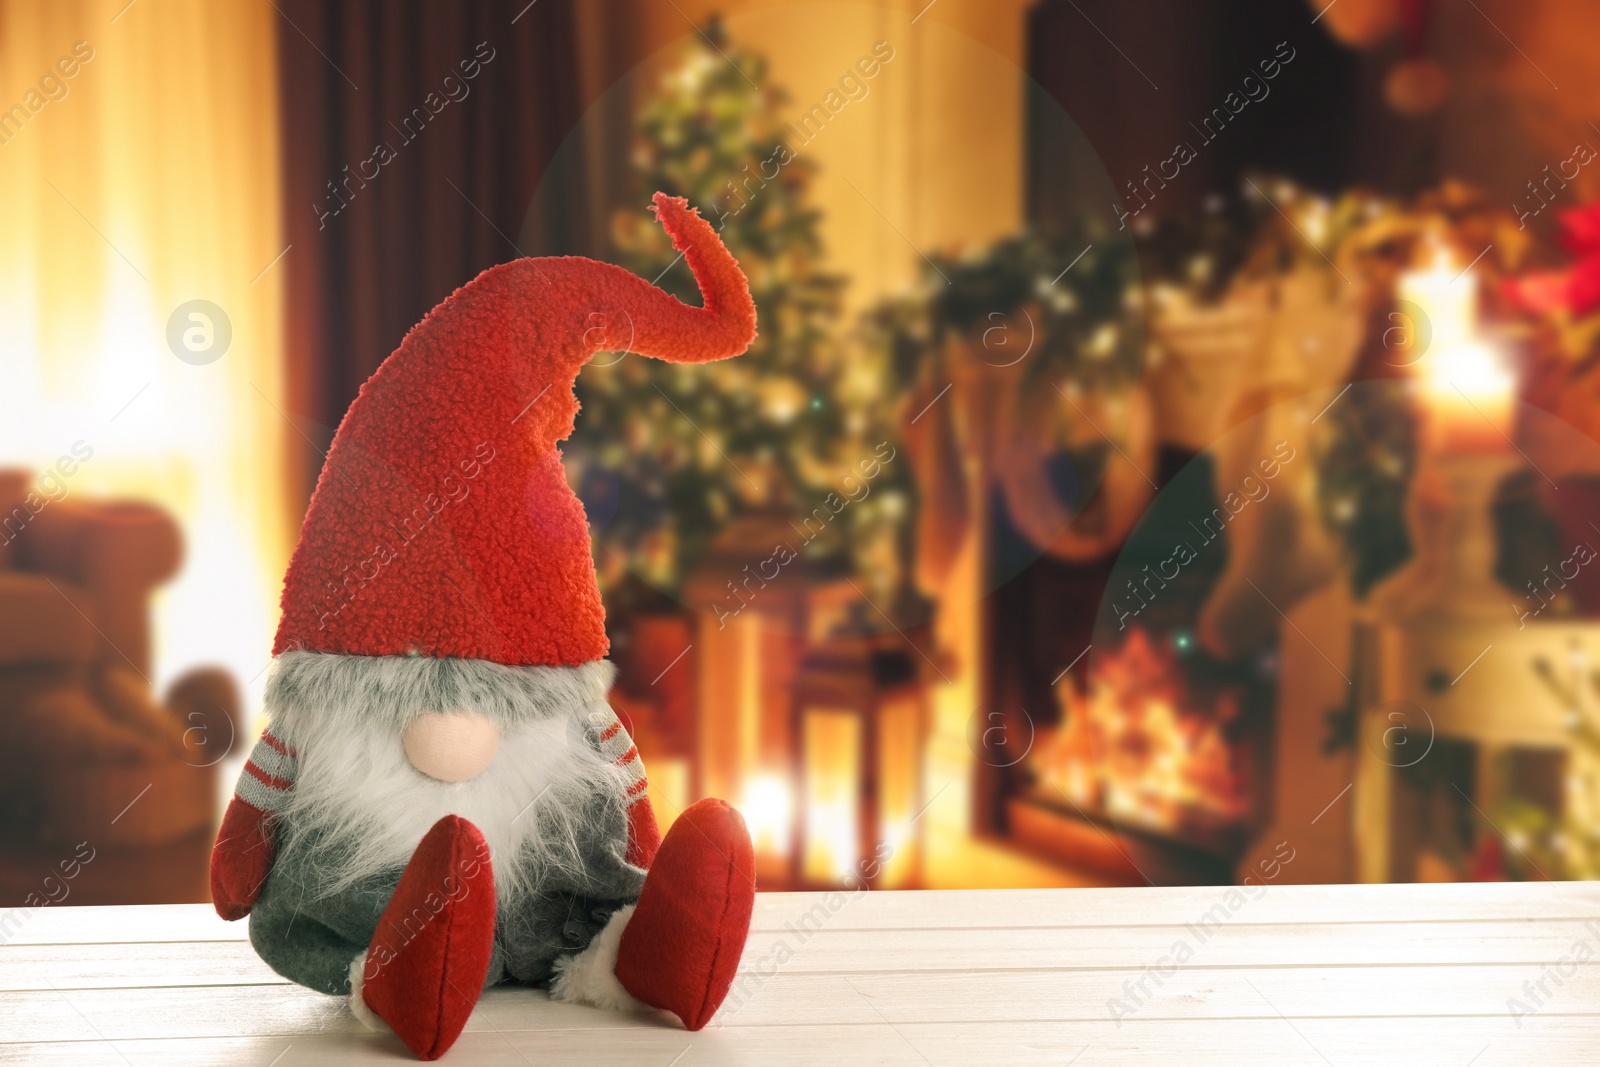 Image of Funny Christmas gnome on white wooden table in room with festive decorations. Space for text